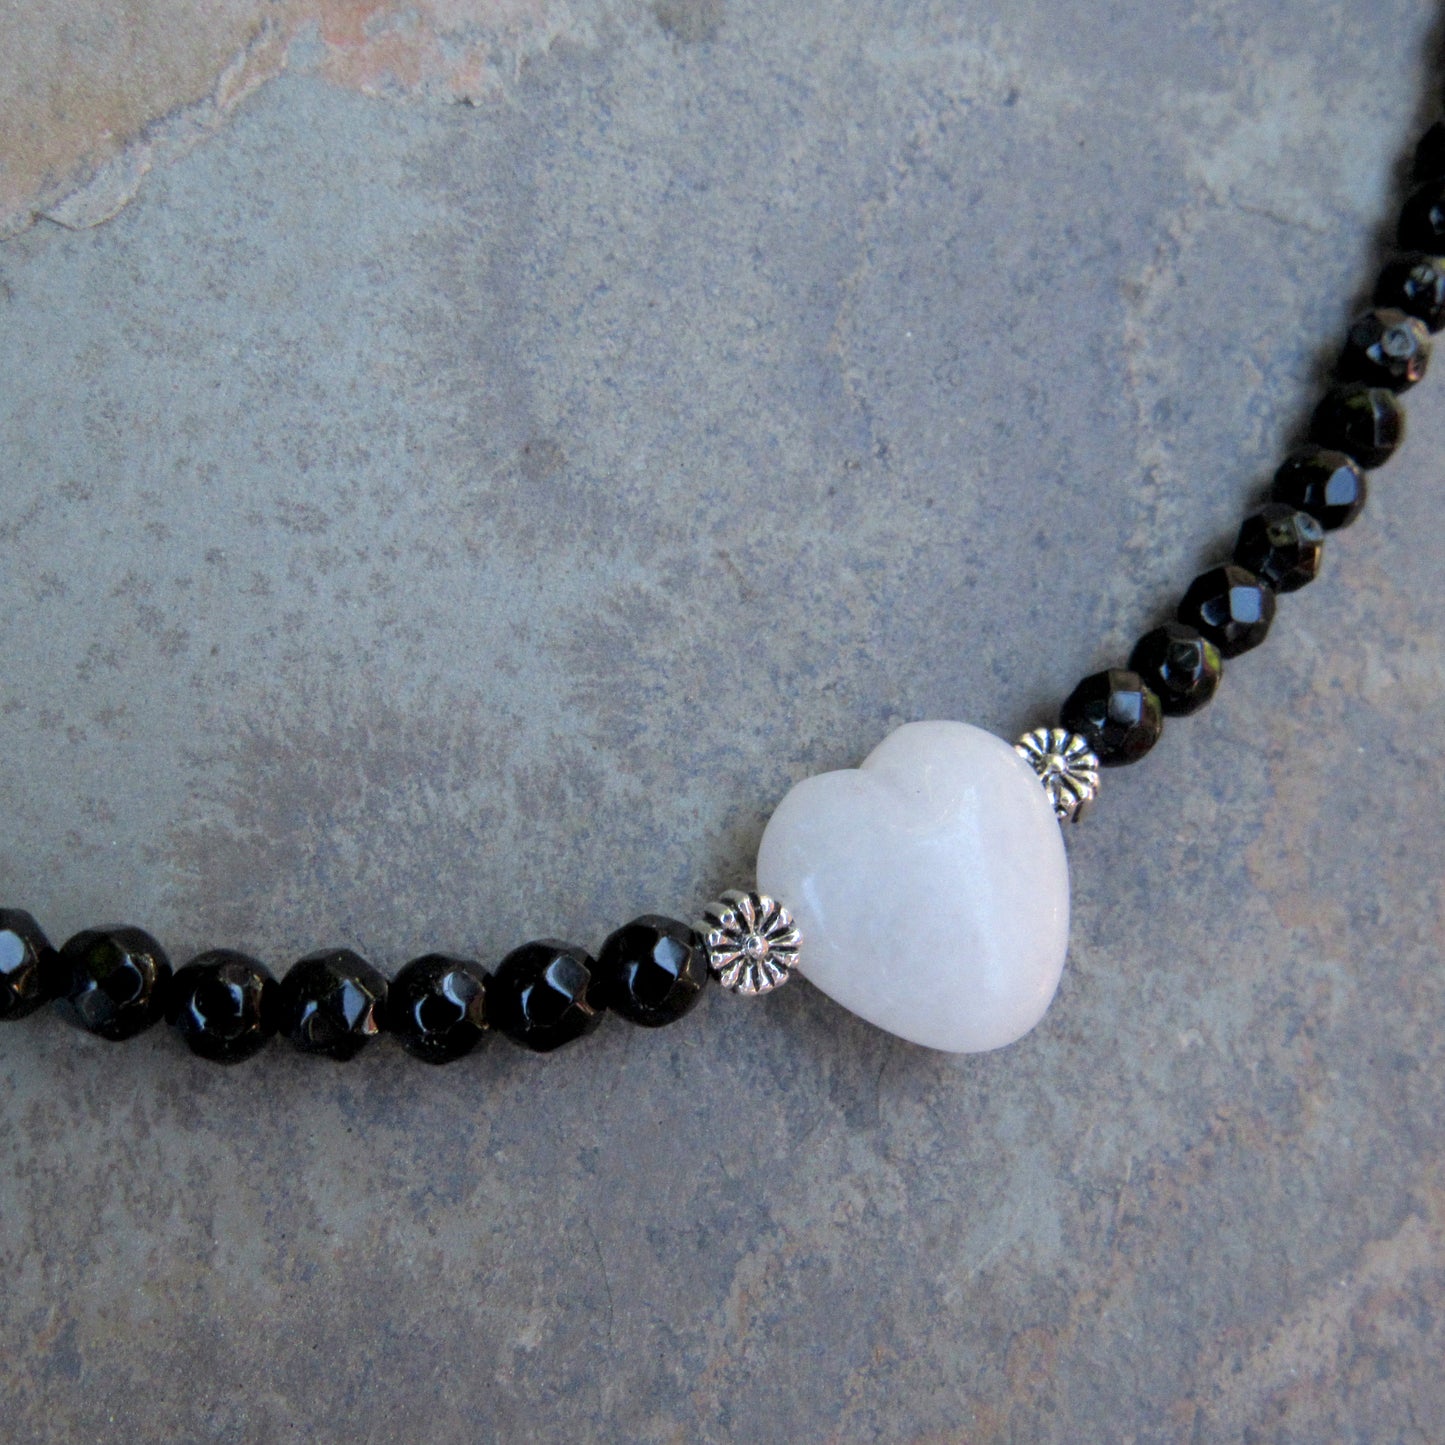 White Jade Heart, Faceted Onyx, and Sterling Silver Choker